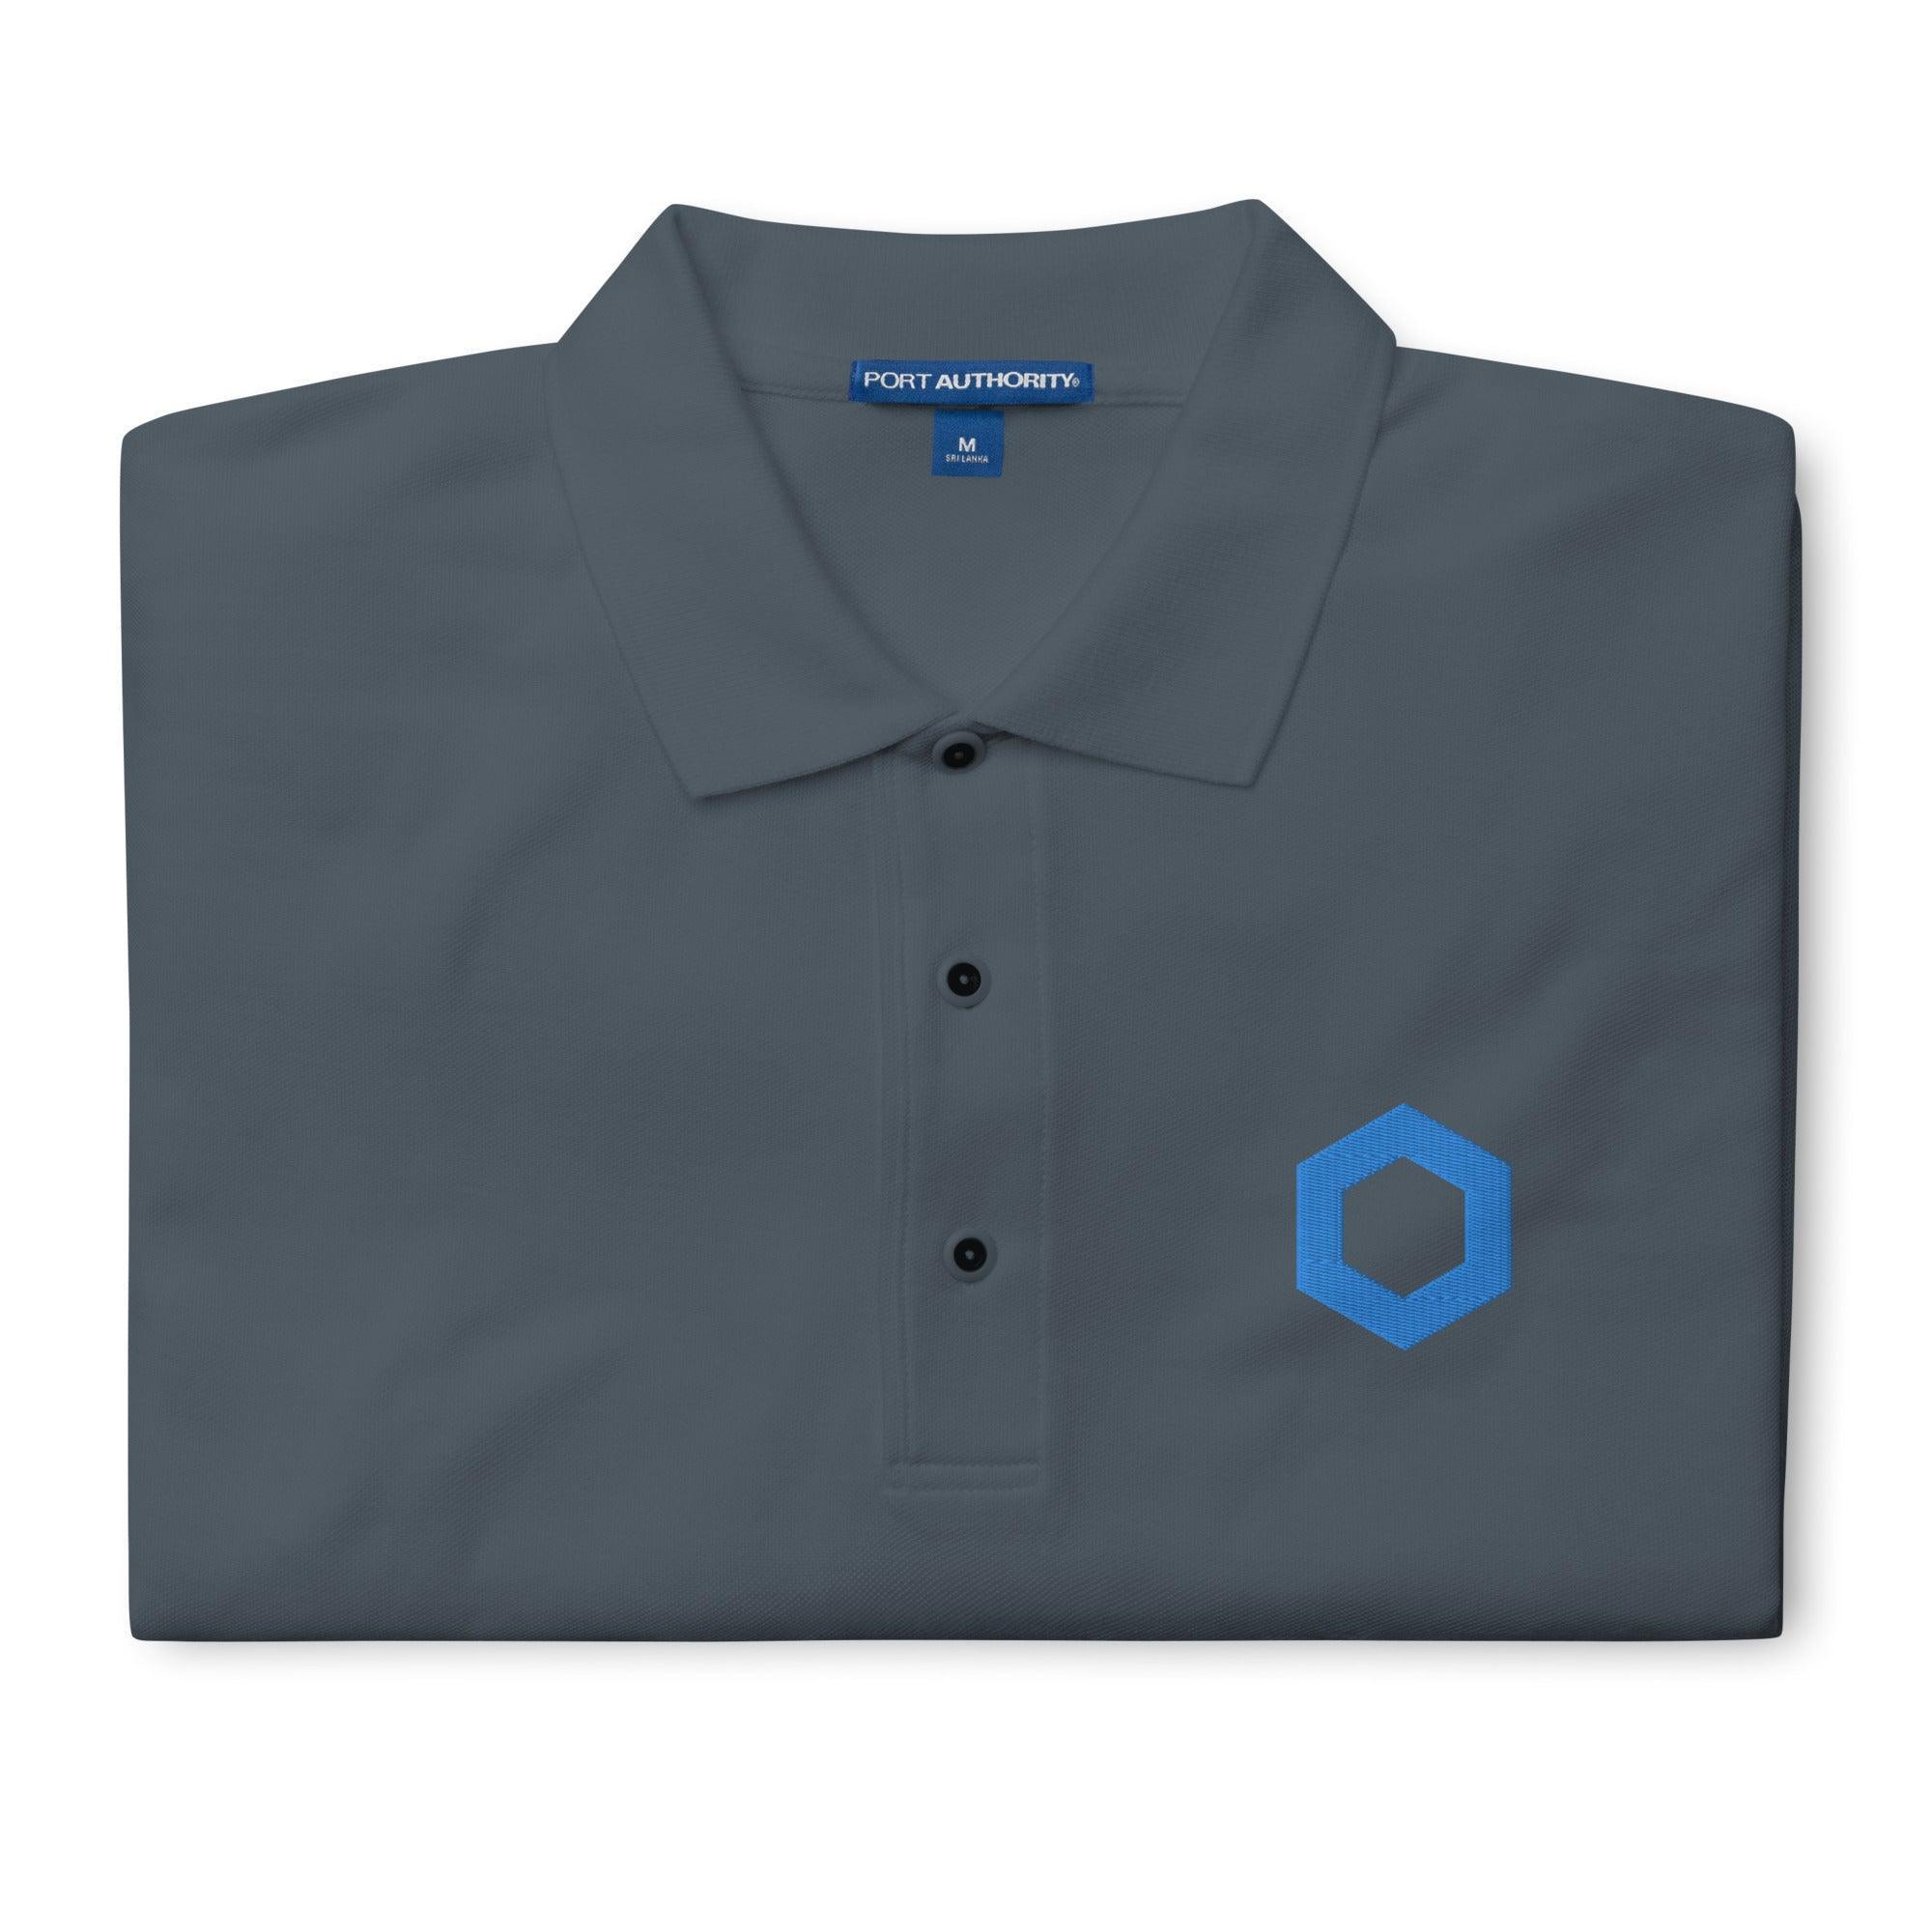 Chainlink Polo Shirt - InvestmenTees